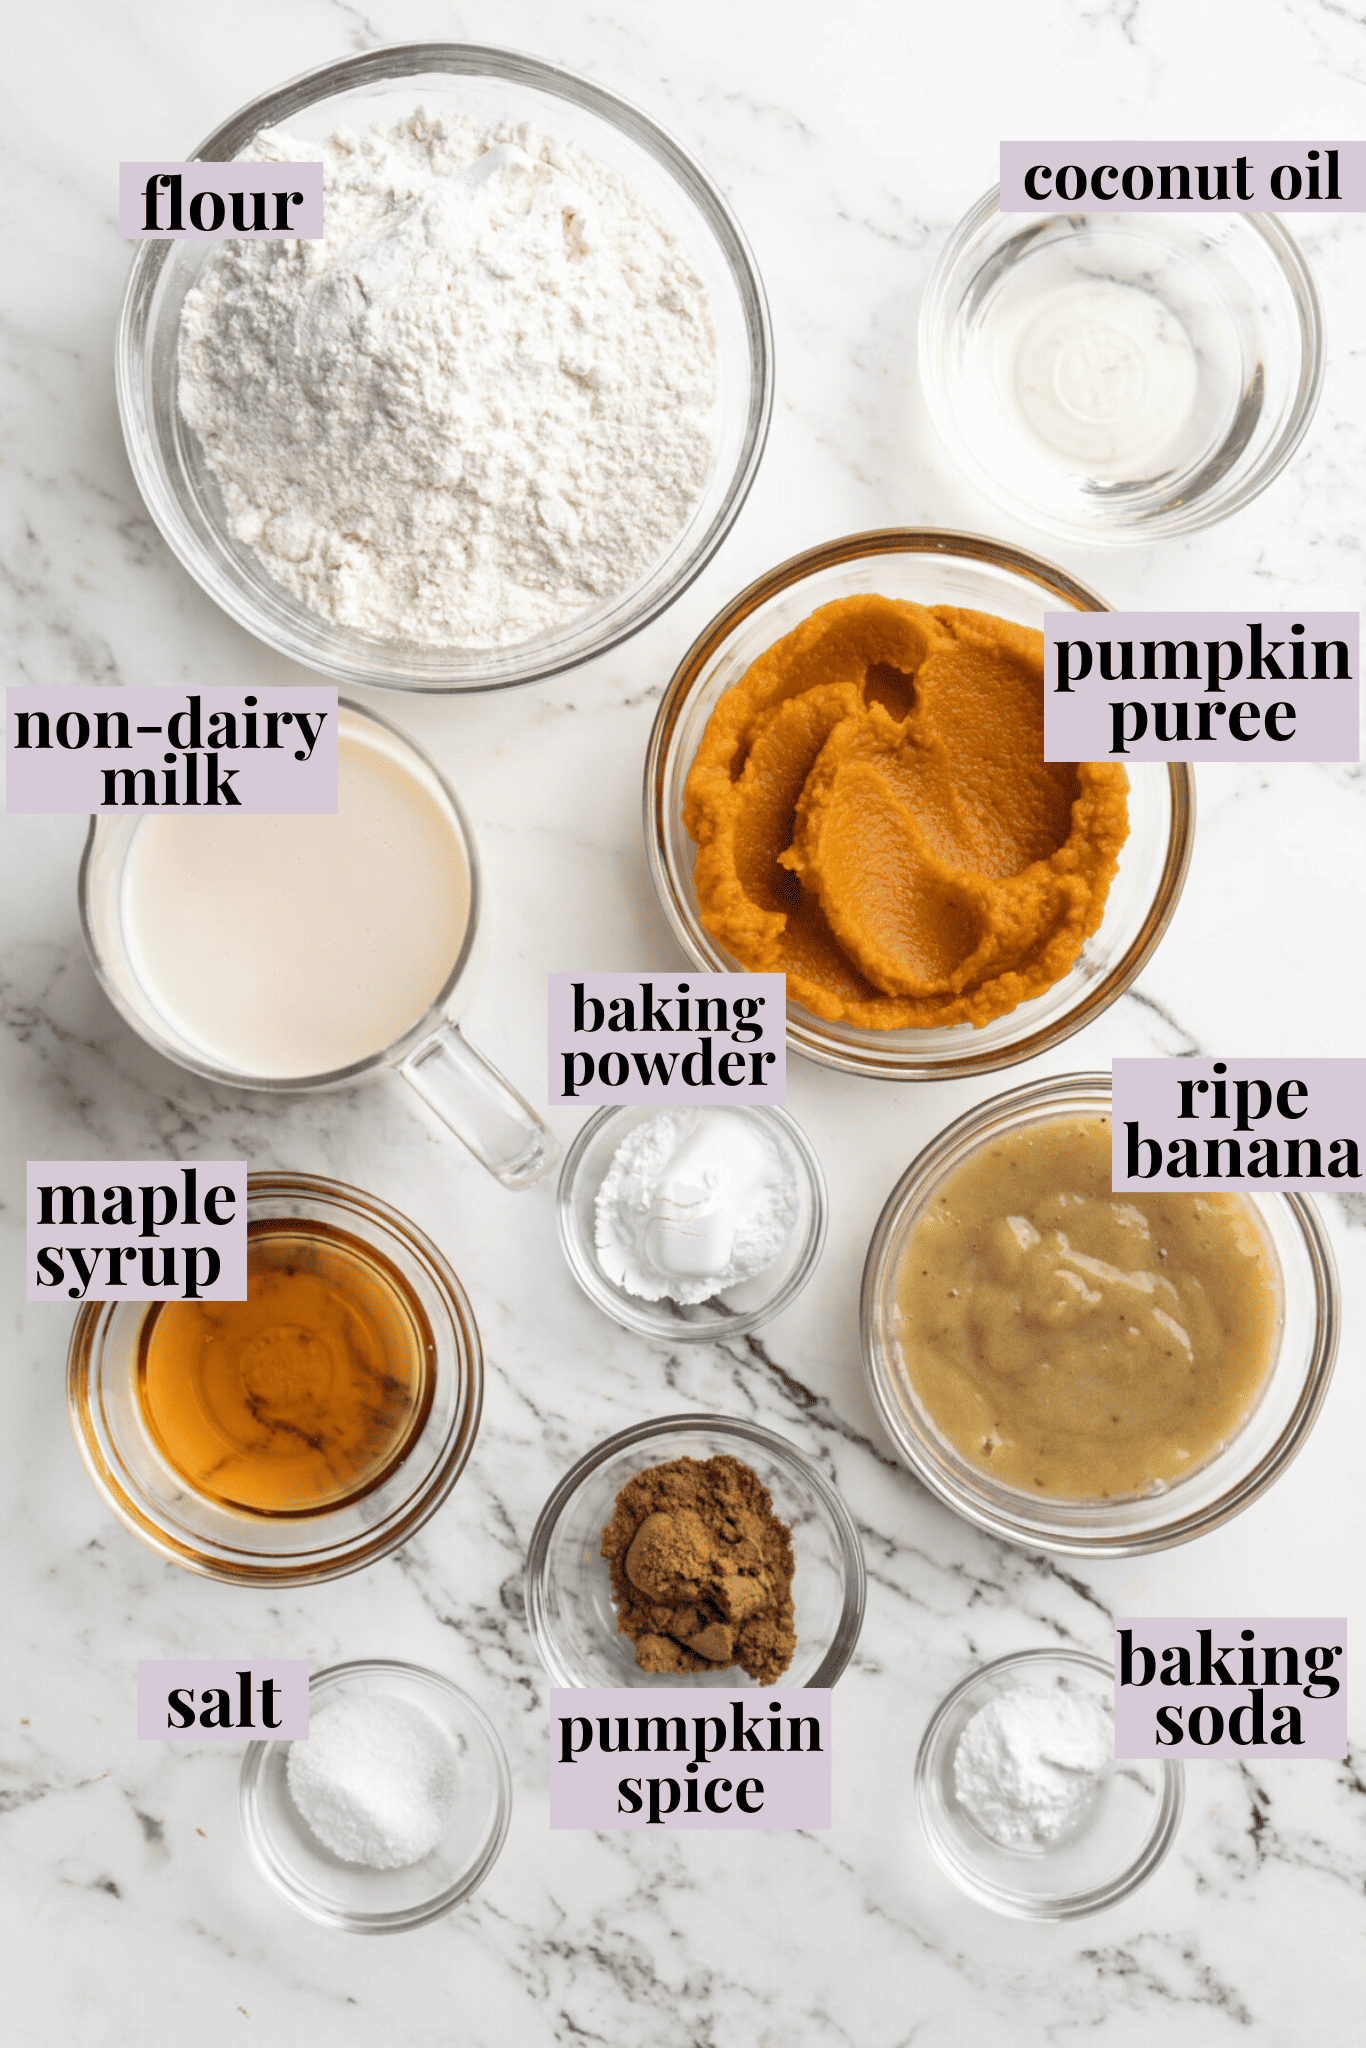 Overhead view of the ingredients needed for pumpkin waffles: a bowl of flour, a bowl of pumpkin puree, a pyrex of non-dairy milk, a glass of agave, a bowl of mashed banana, a glass of coconut oil, a bowl of pumpkin spice, a bowl of salt, a bowl of baking powder, and a bowl of baking soda